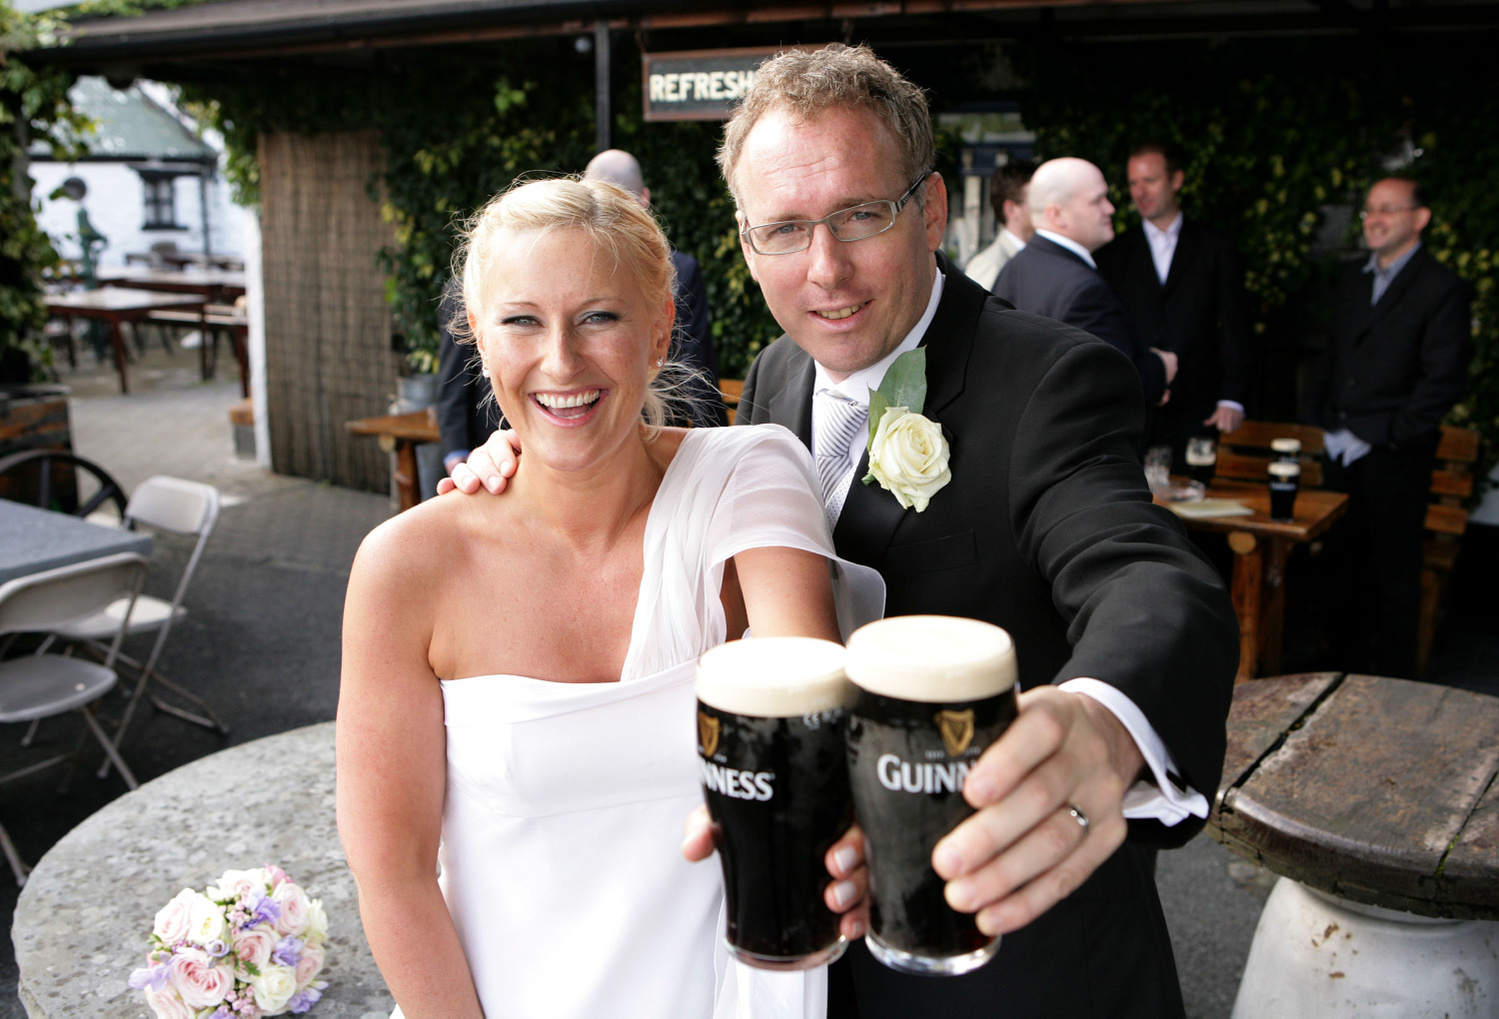 Fun wedding portrait of bride and groom smiling and holding two pints of Guinness professional wedding photographer Dublin Ireland 